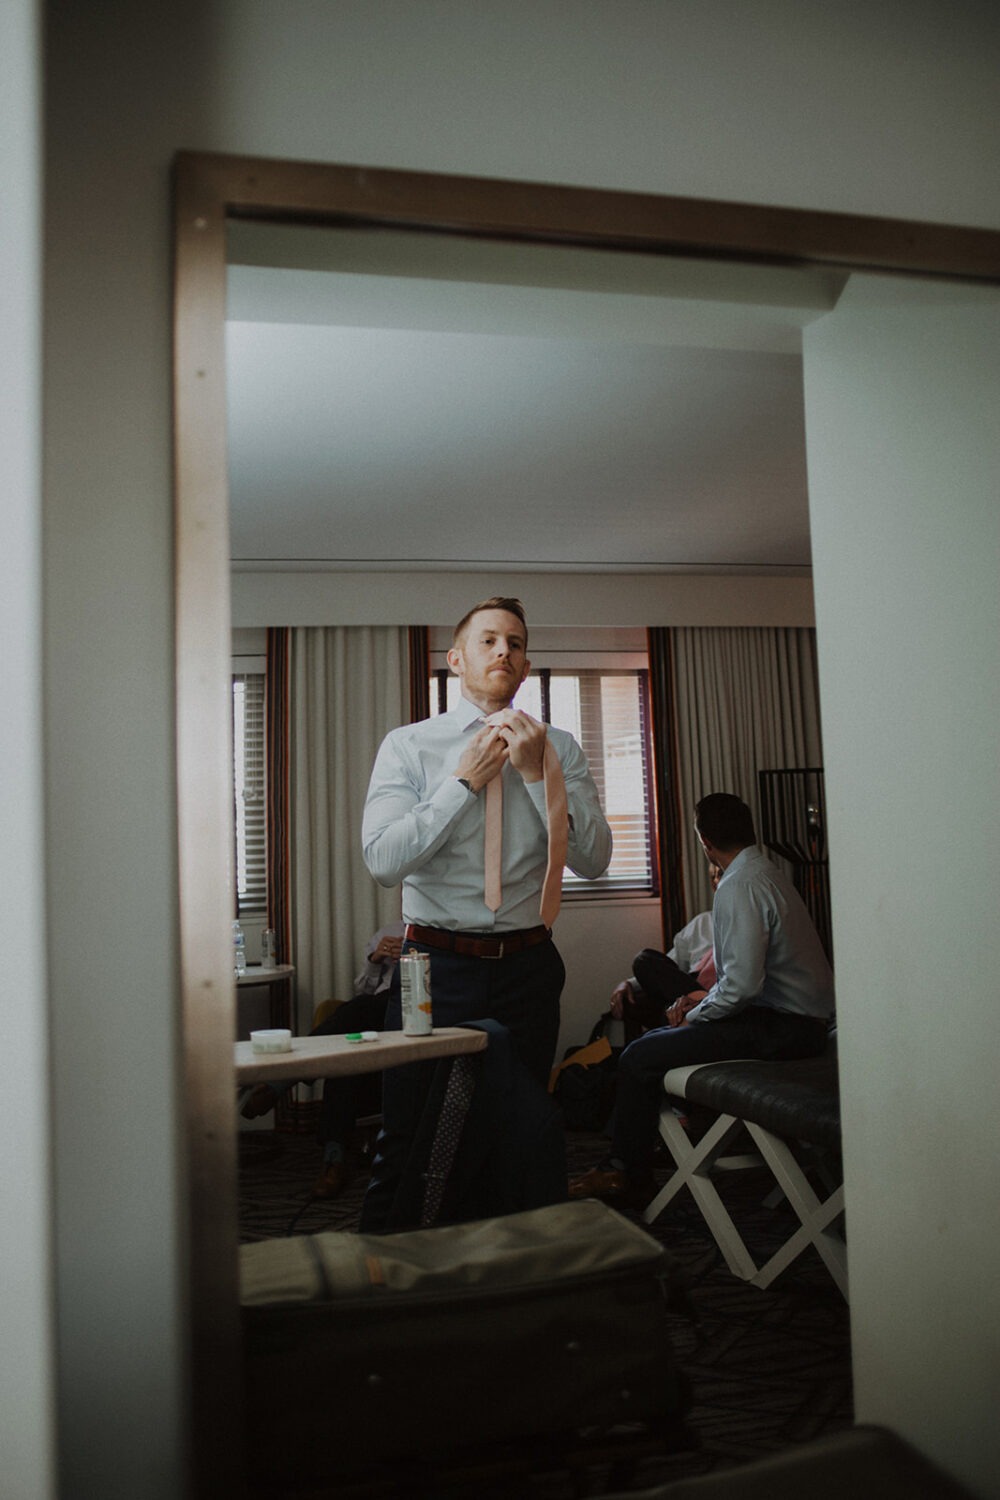 groom ties tie while getting ready for wedding 